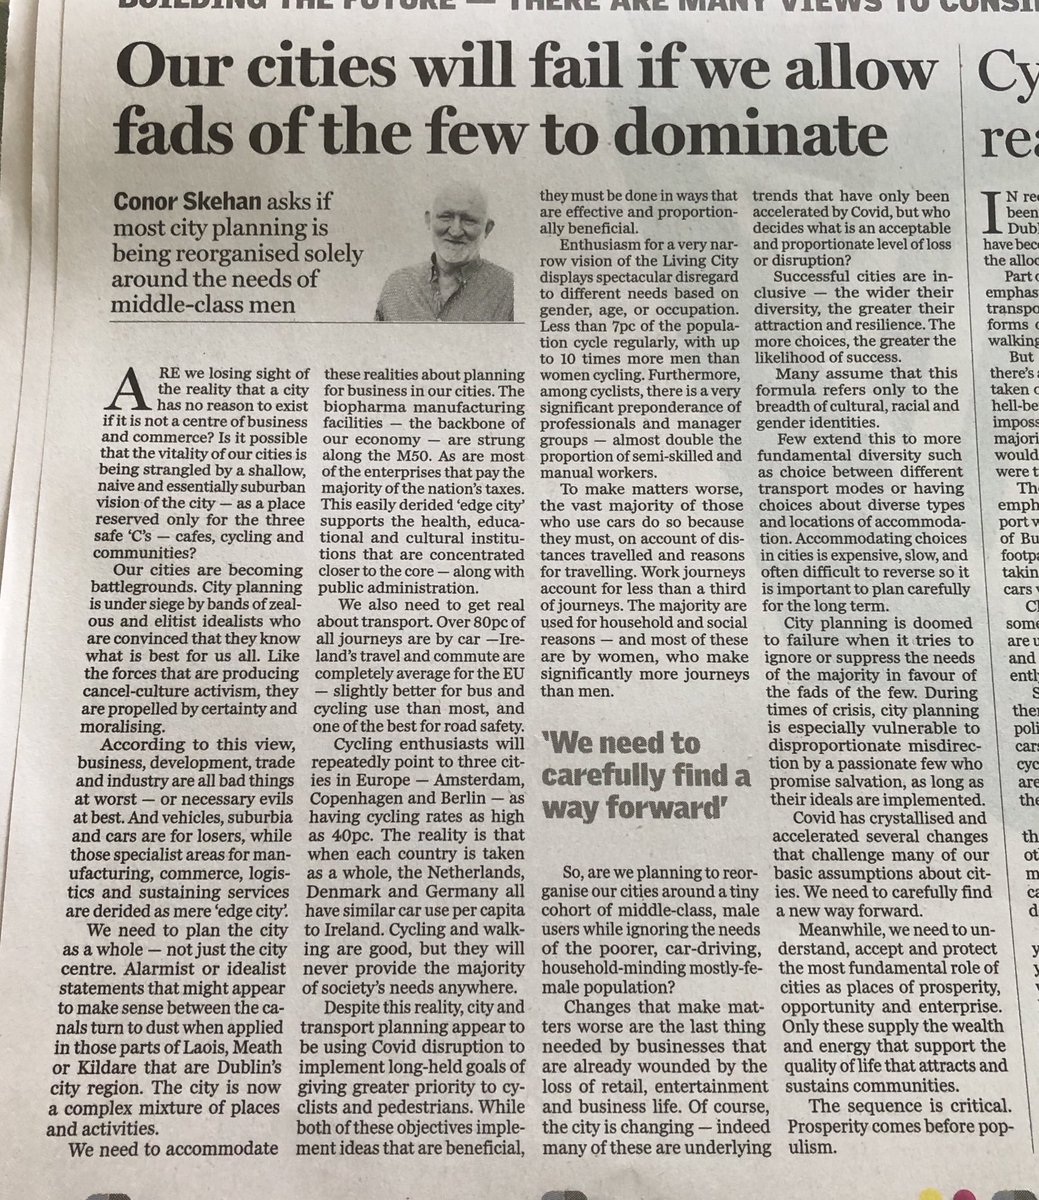 1/A brief thread in response to Conor Skehan's article in the  @Independent_ie